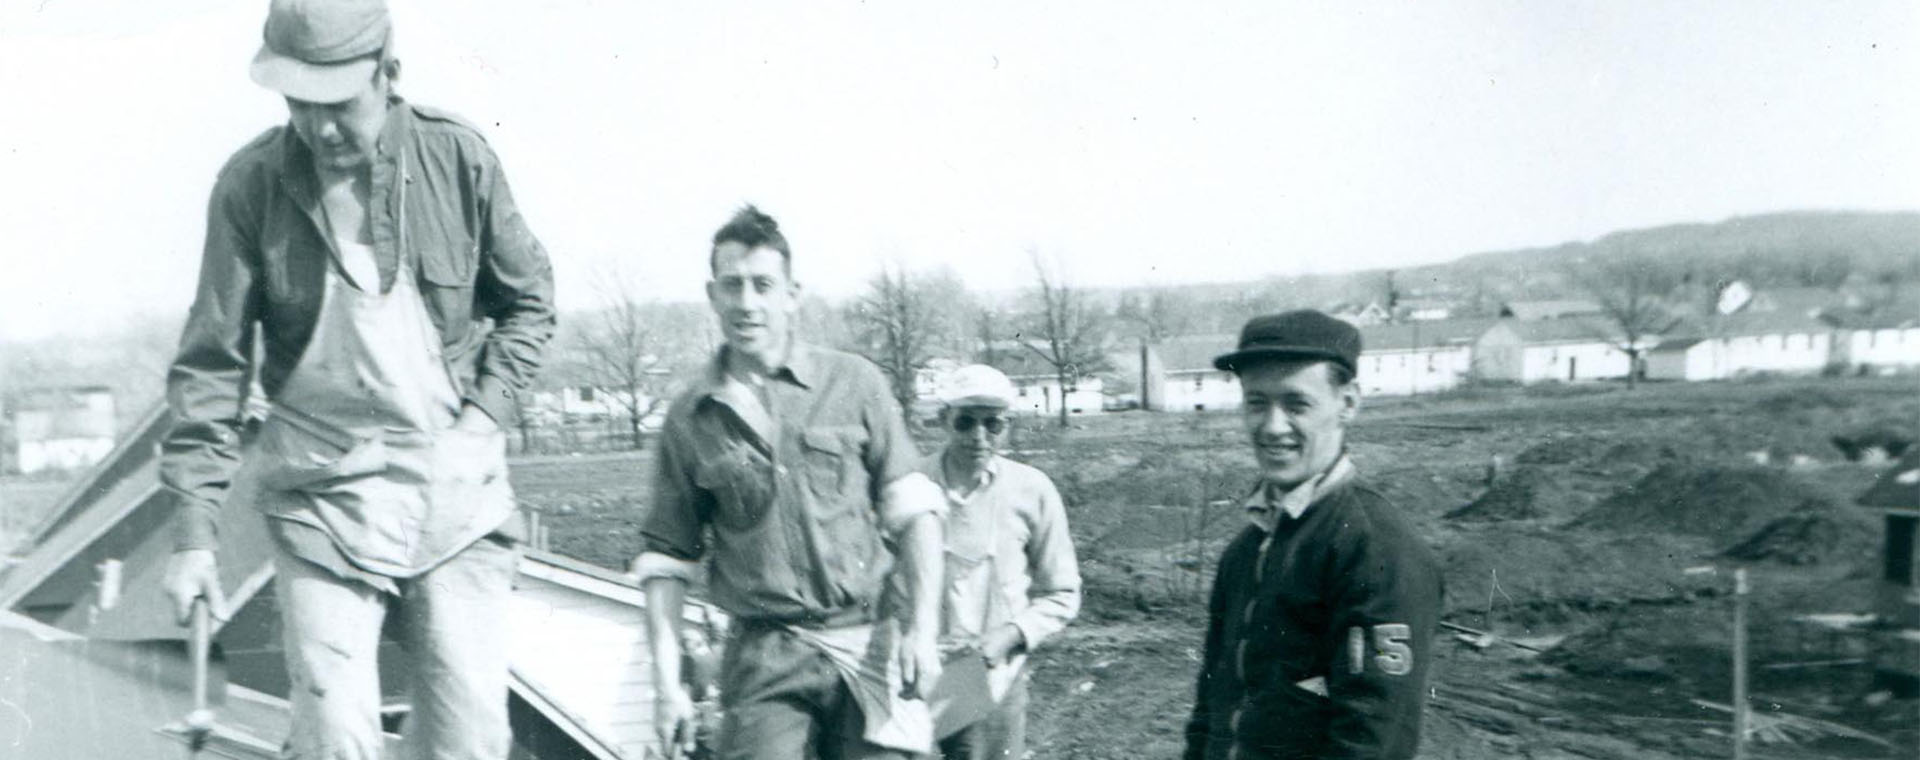 Black and white photograph of a group of four men on a roof.